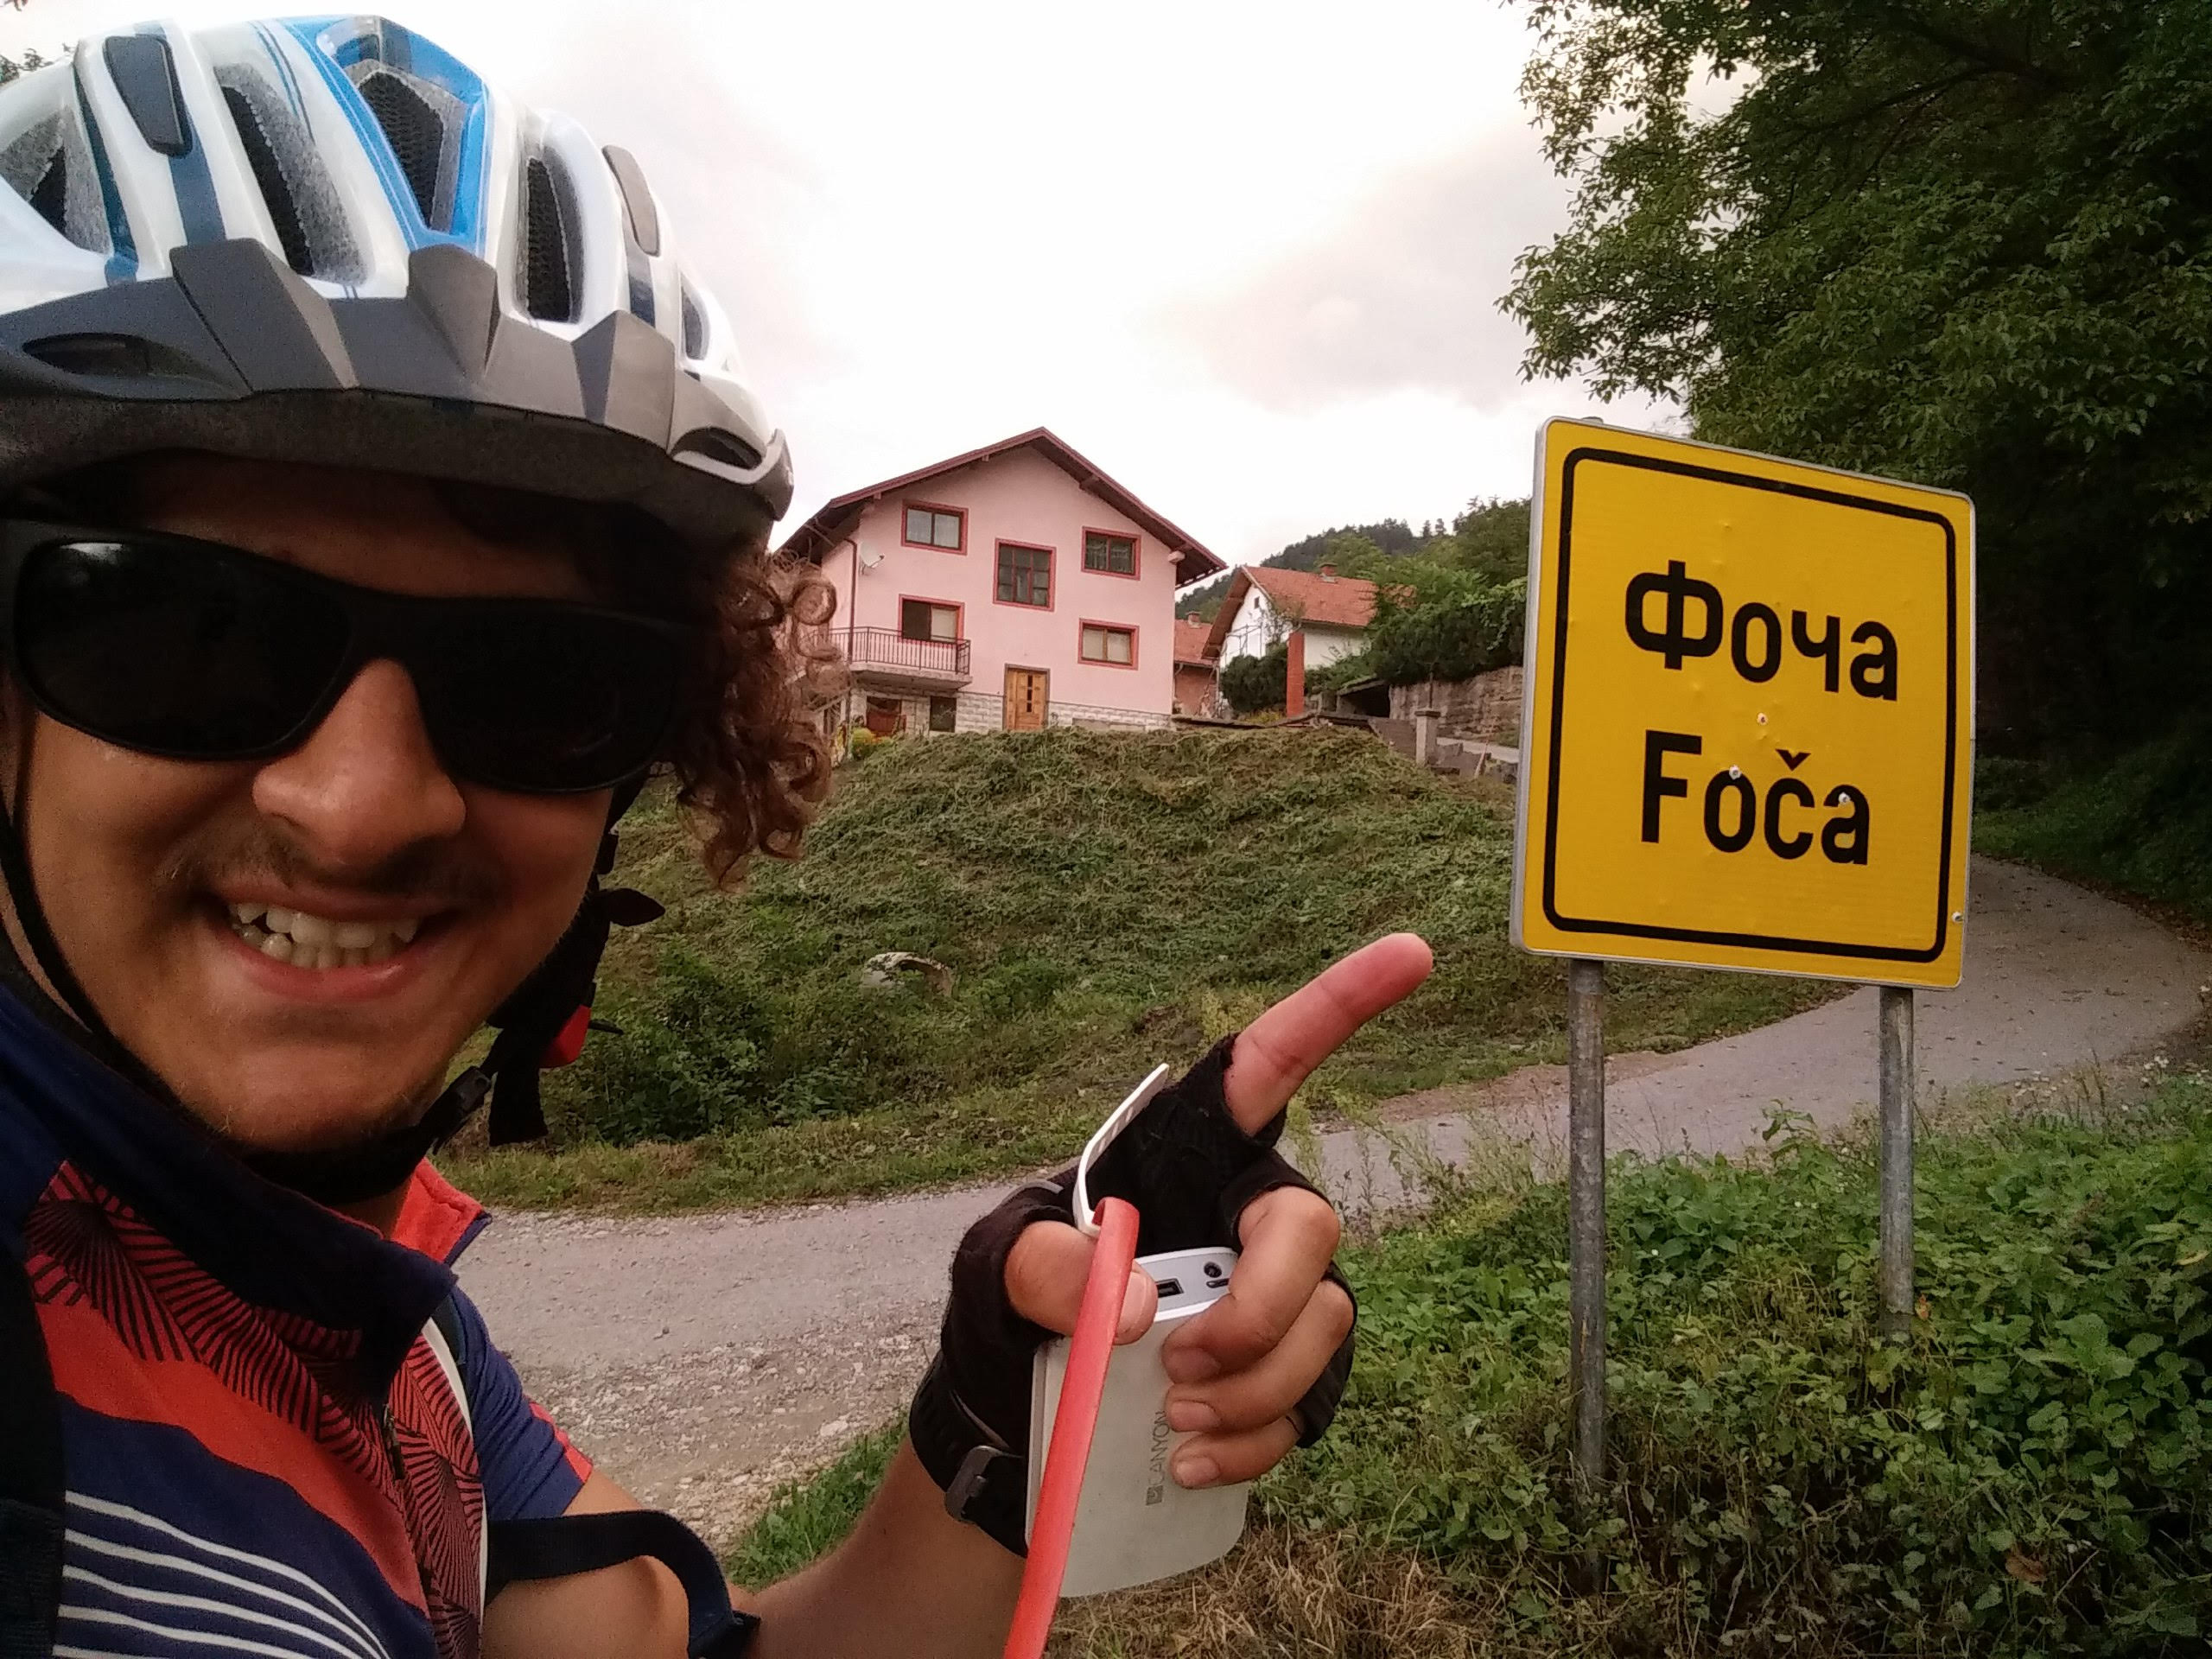 Me, myself and my bicycle: Around Bosnia and Herzegovina in 28 days